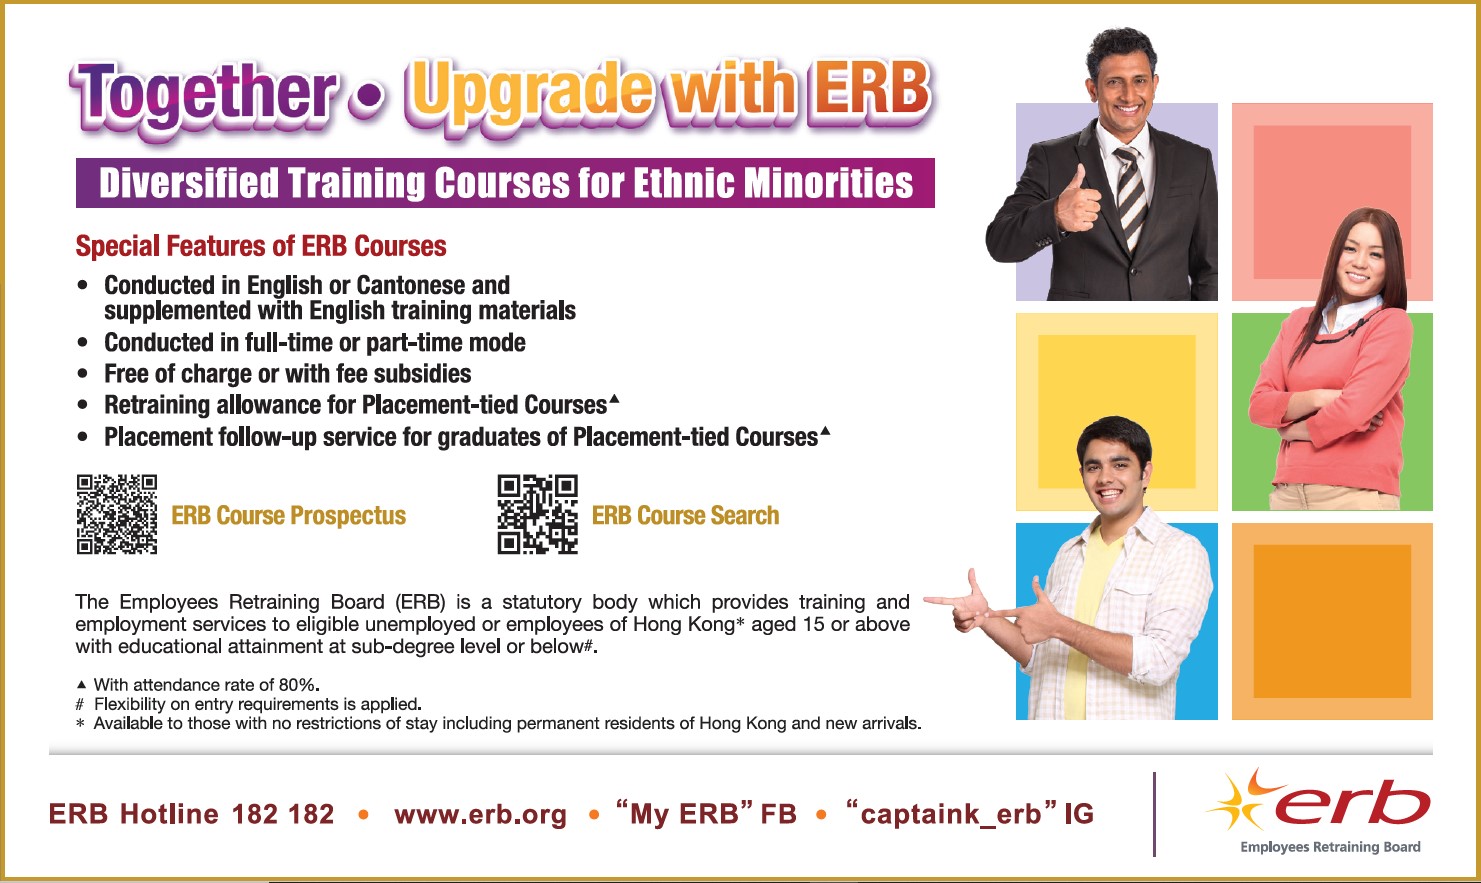 Click here to download the image version of newspaper advertisement of Training for Ethnic Minorities (June 2023)